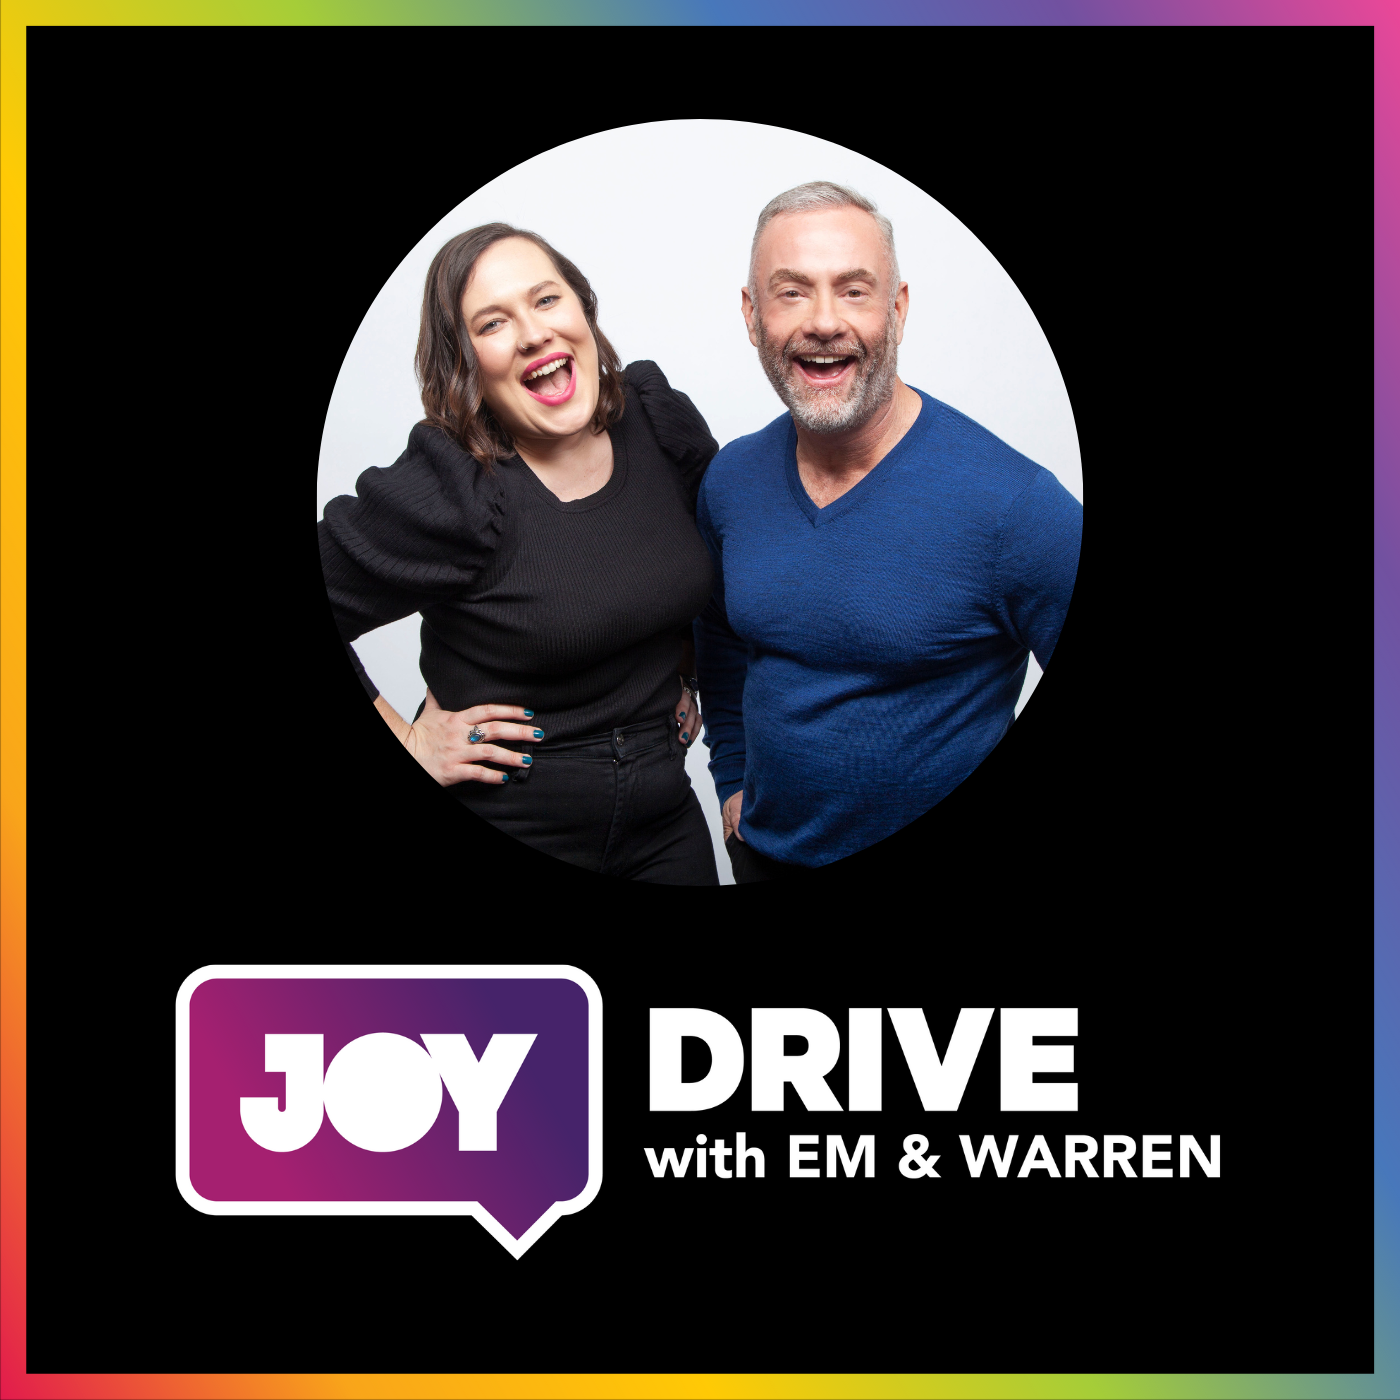 Evita March x JOY Drive: What Kind of People Catfish?